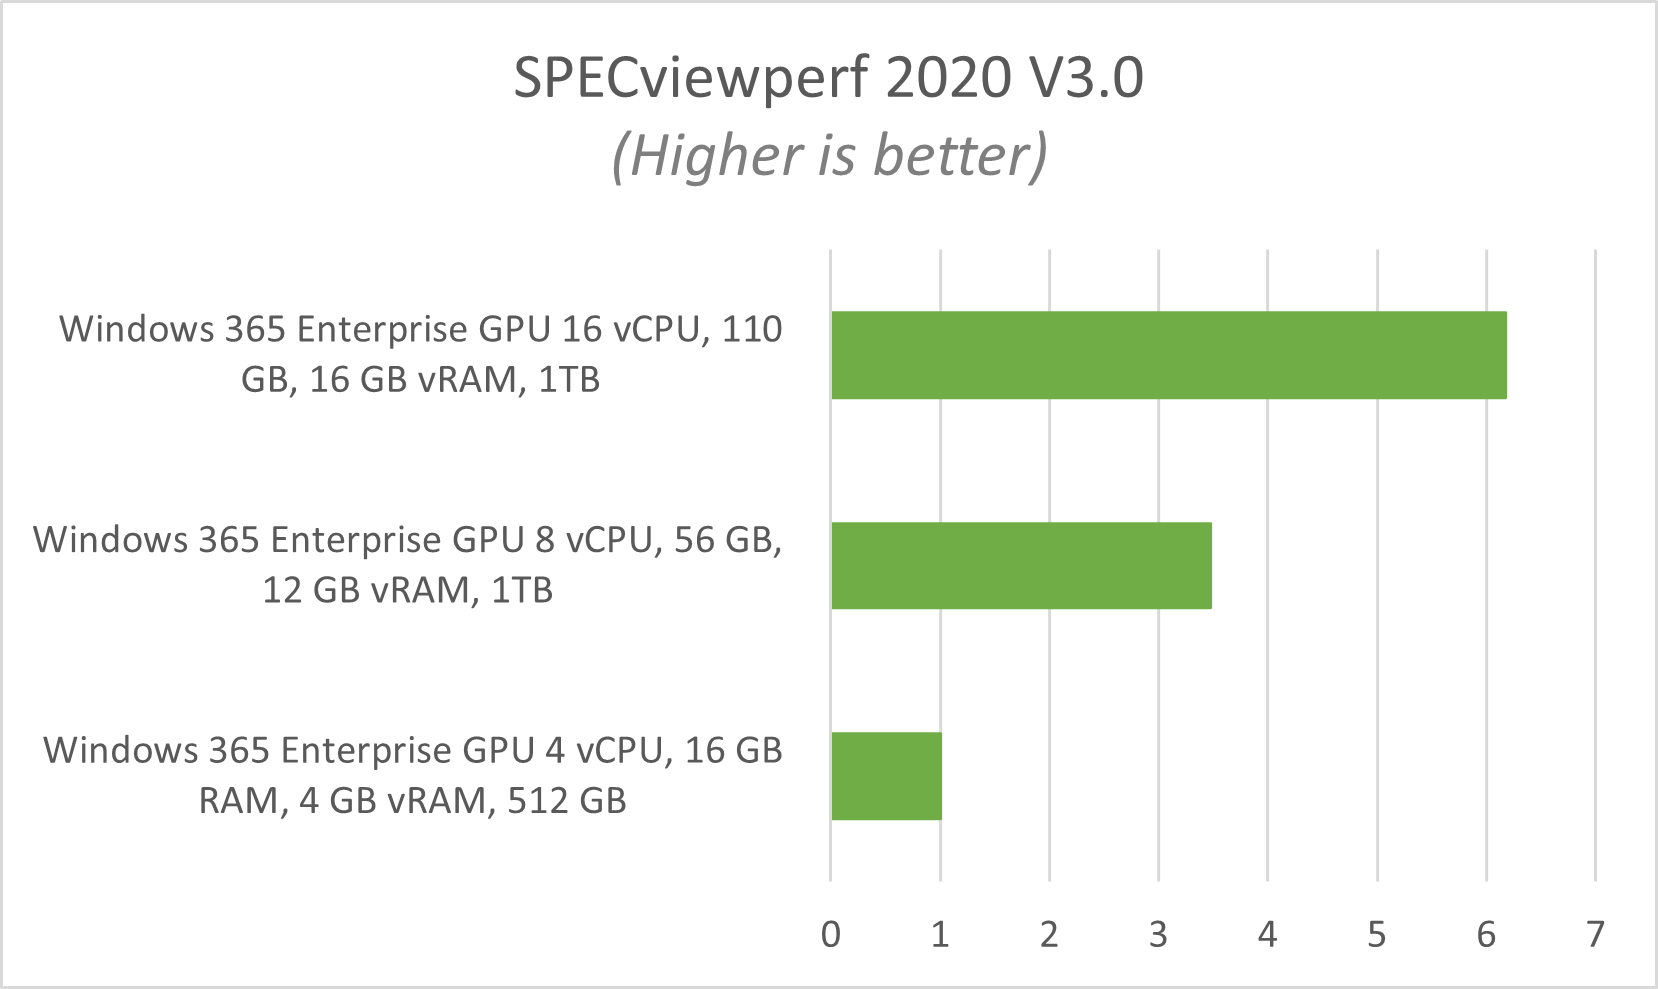 Horizontal bar chart depicting the relative performance scores of the three different Windows 365 GPU configurations, derived from SPECviewperf 2020 V3.0 tests.